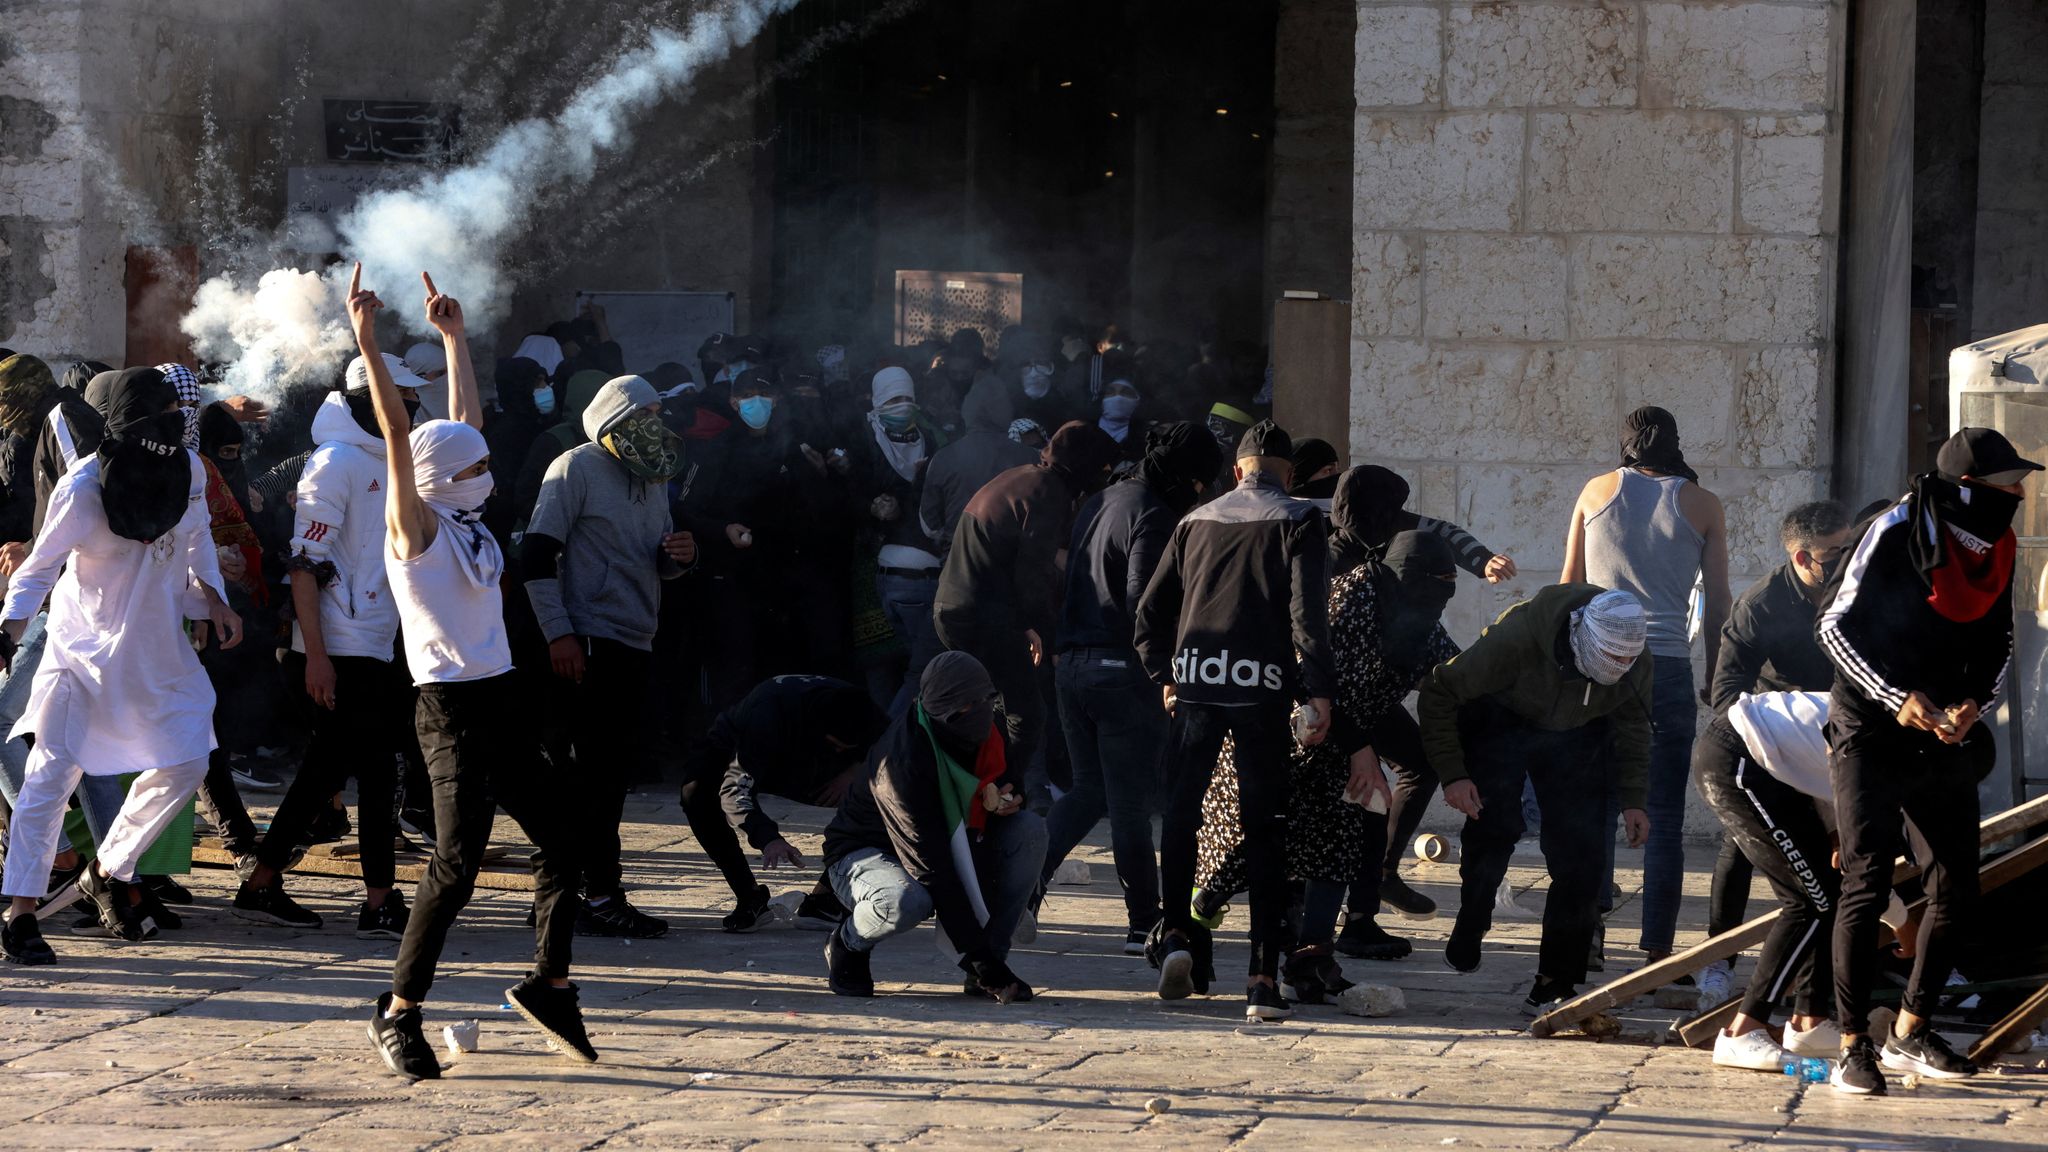 Al-Aqsa mosque: 'More than 150' injured as Israeli police clash with ...